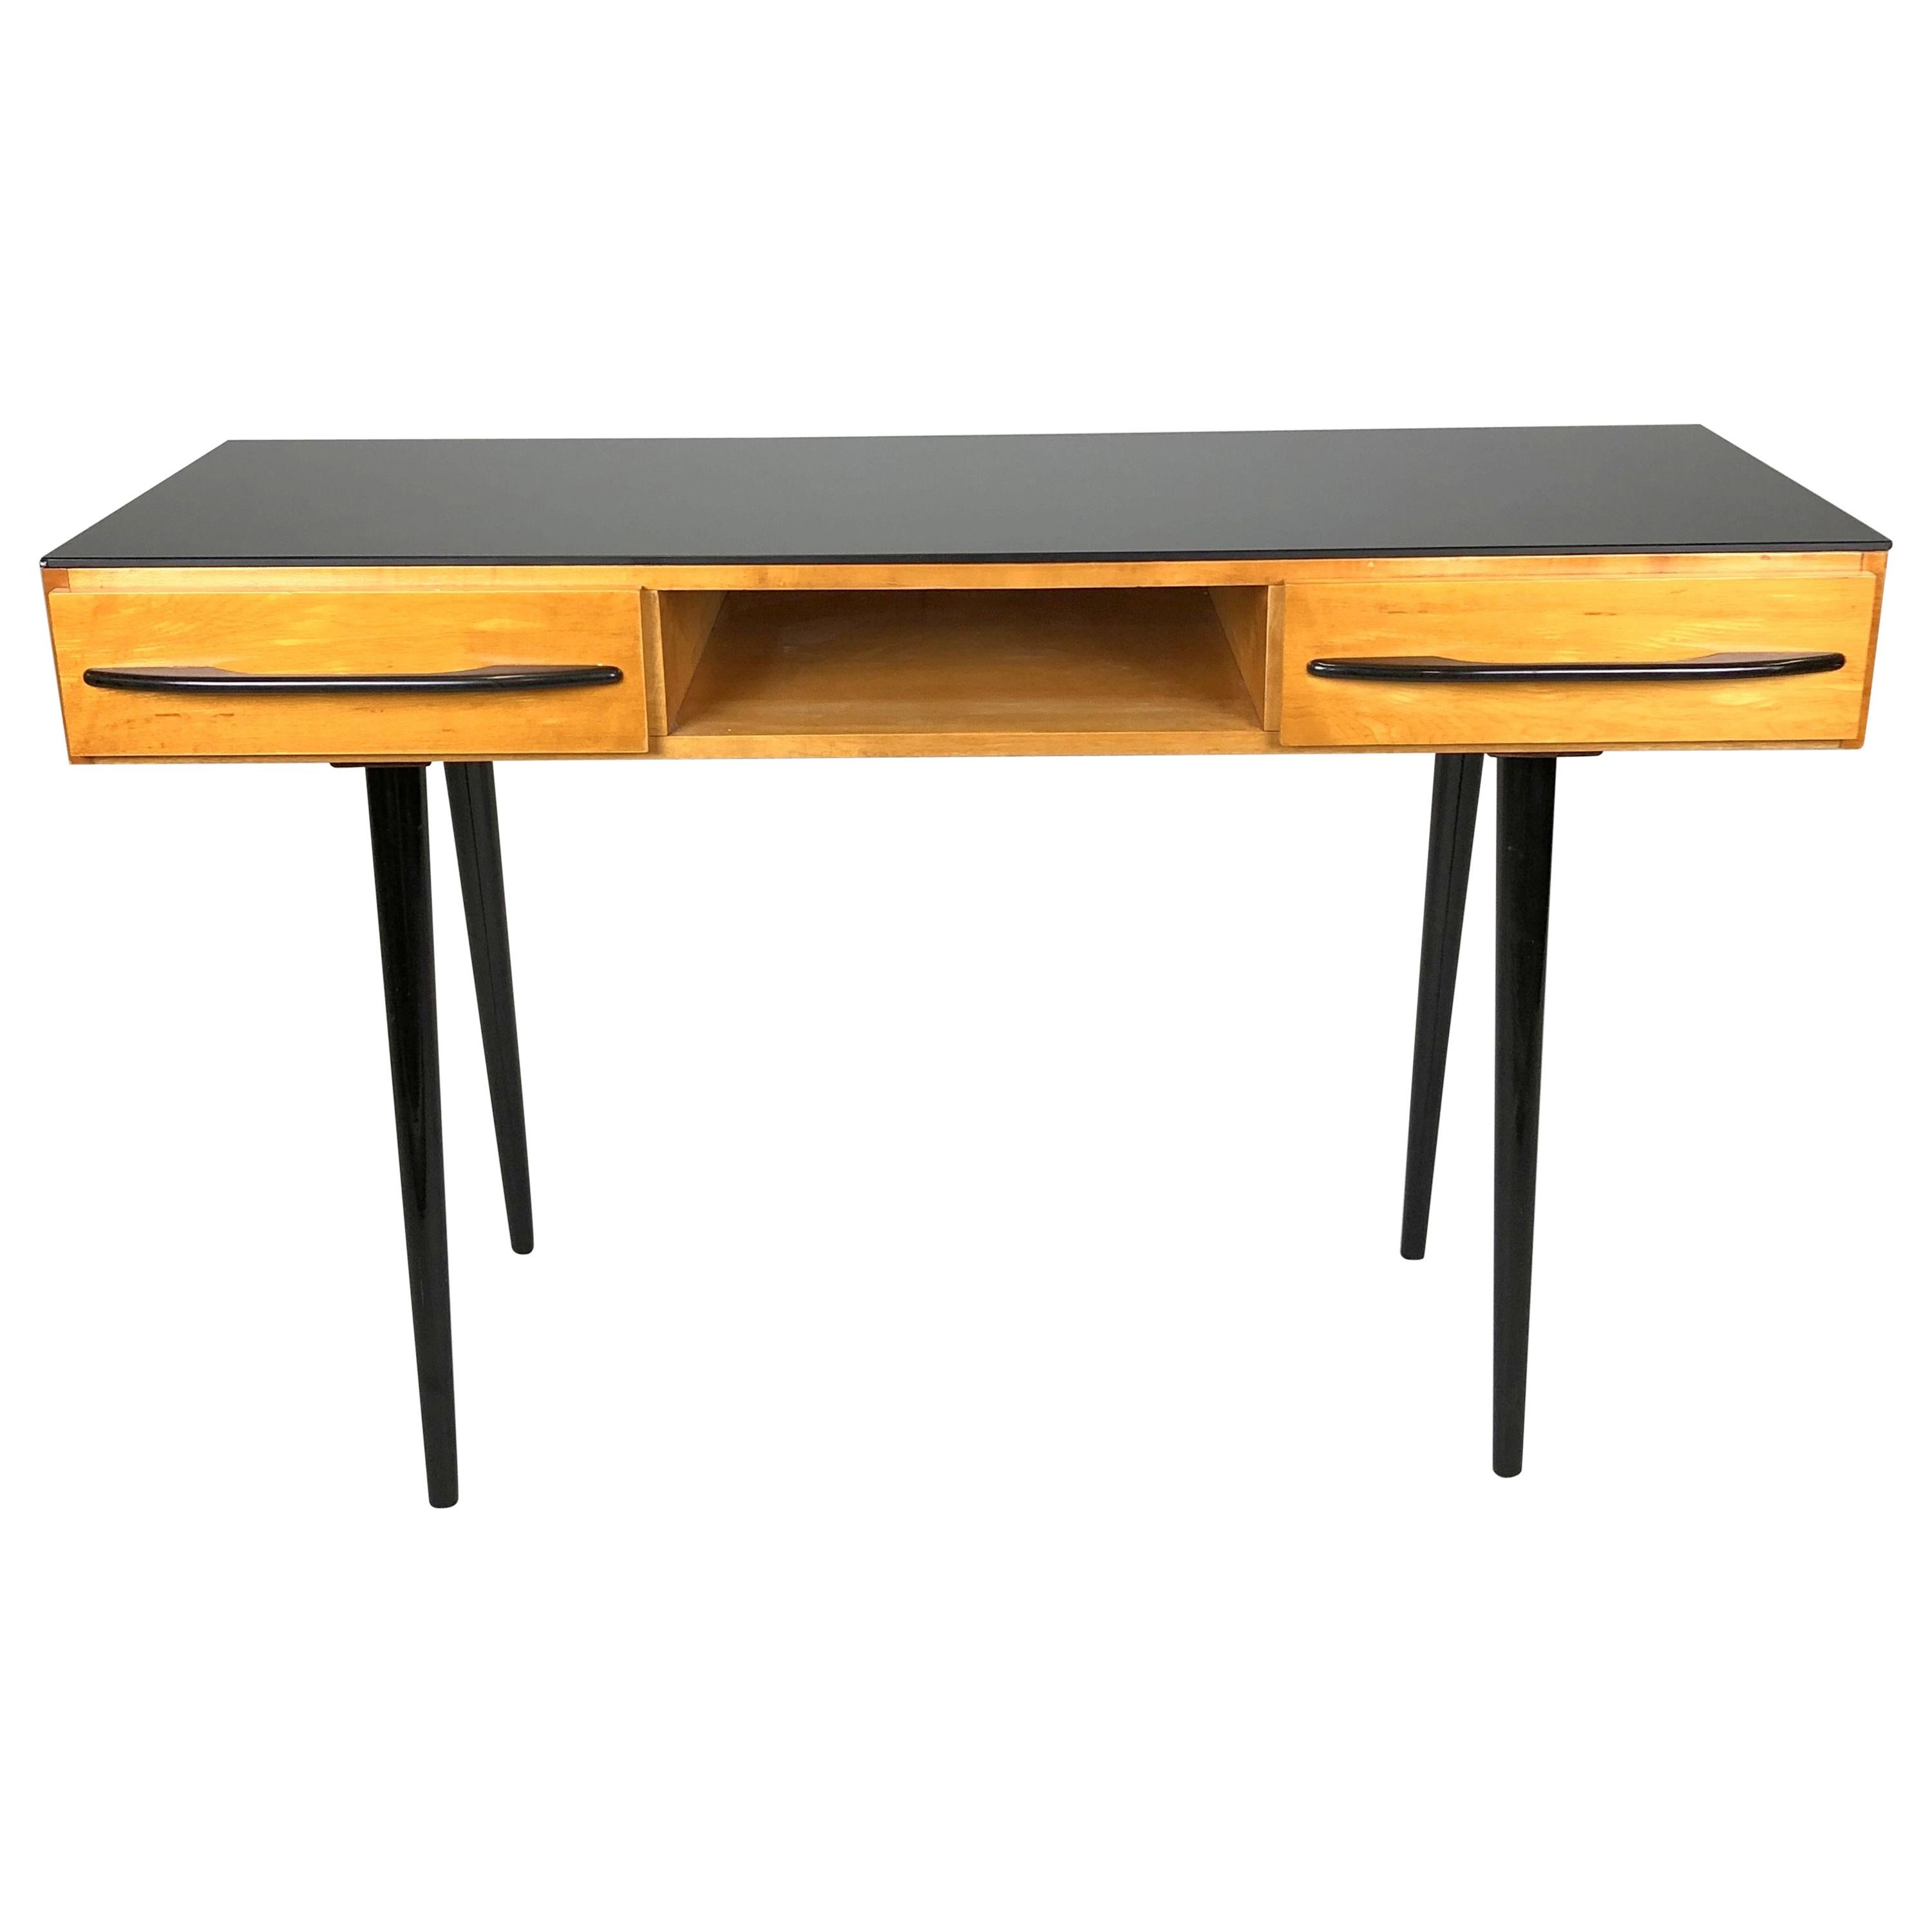 Table by Arch, Mojmir Pozar for UP Zavody, 1960s